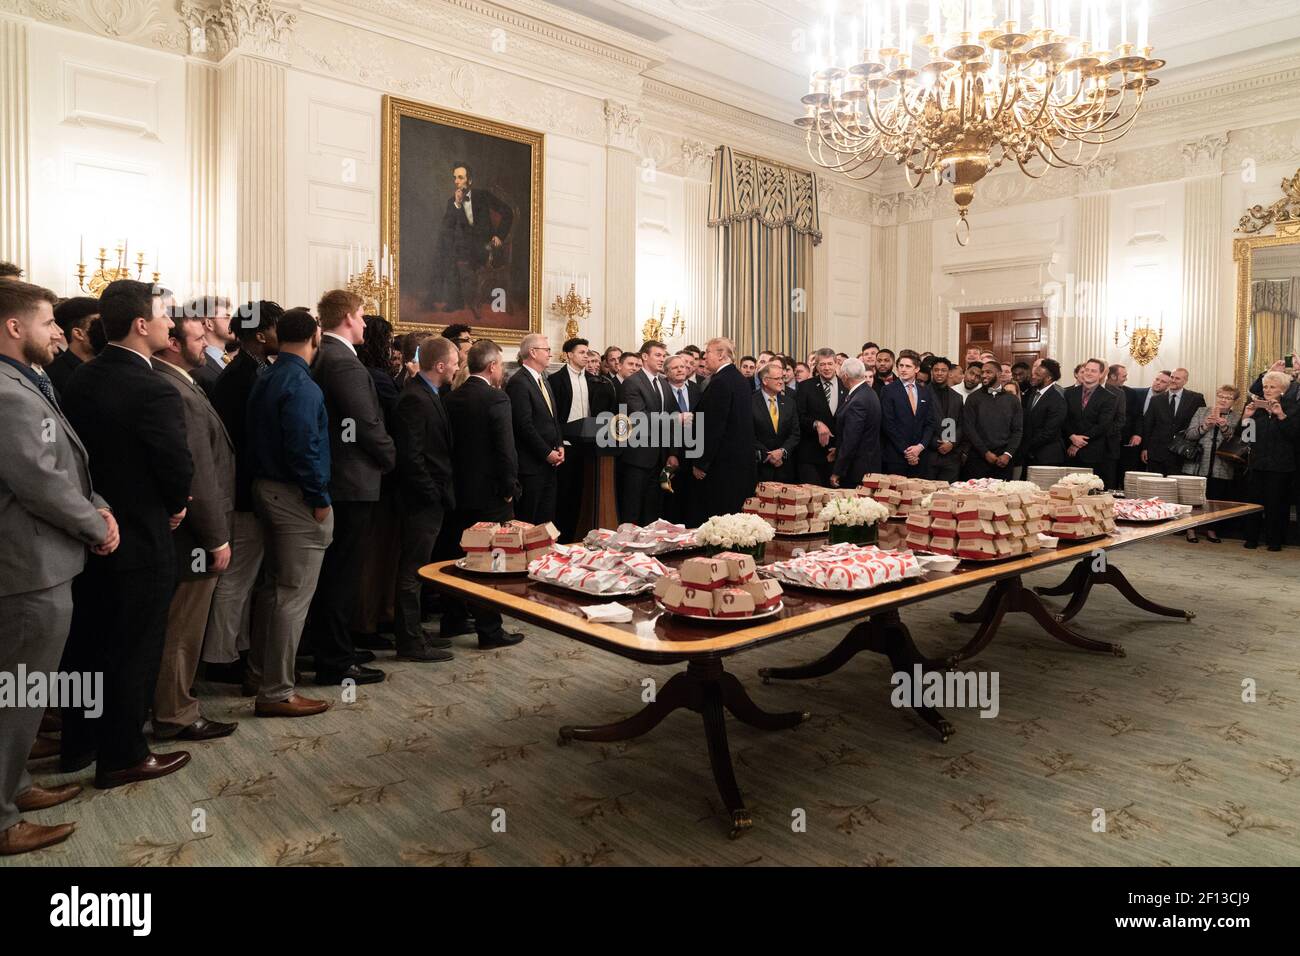 President Donald Trump welcomes the 2018 FCS Division I Football National Champions the North Dakota Bison Monday March 4 2019 to lunch in the State Dining Room of the White House. Stock Photo